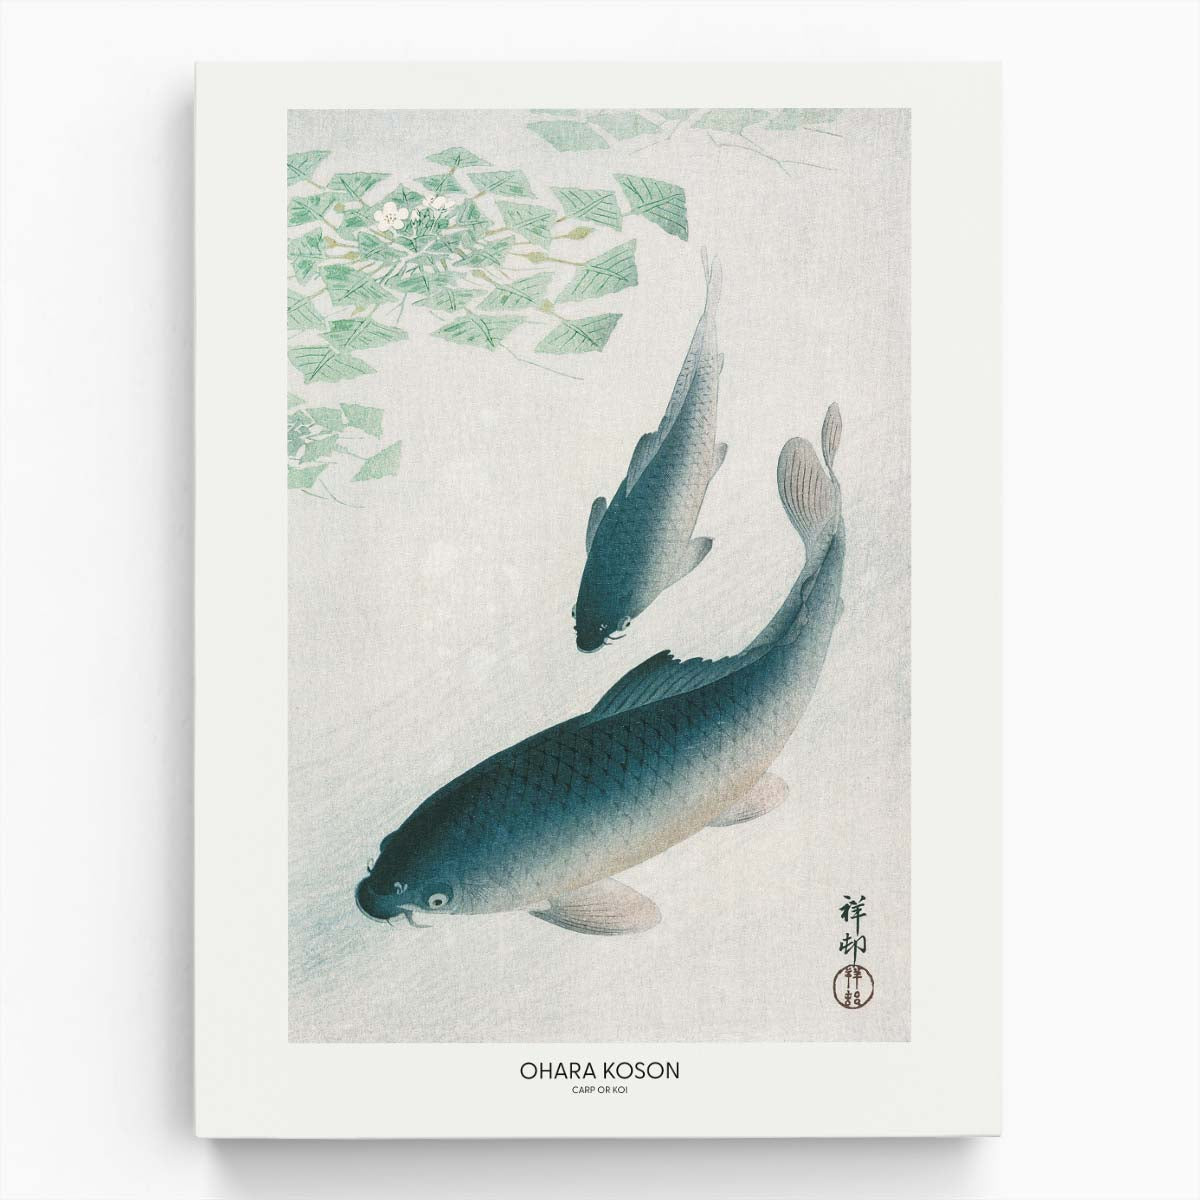 Vintage Ohara Koson Koi Fish Japanese Art Illustration Poster by Luxuriance Designs, made in USA